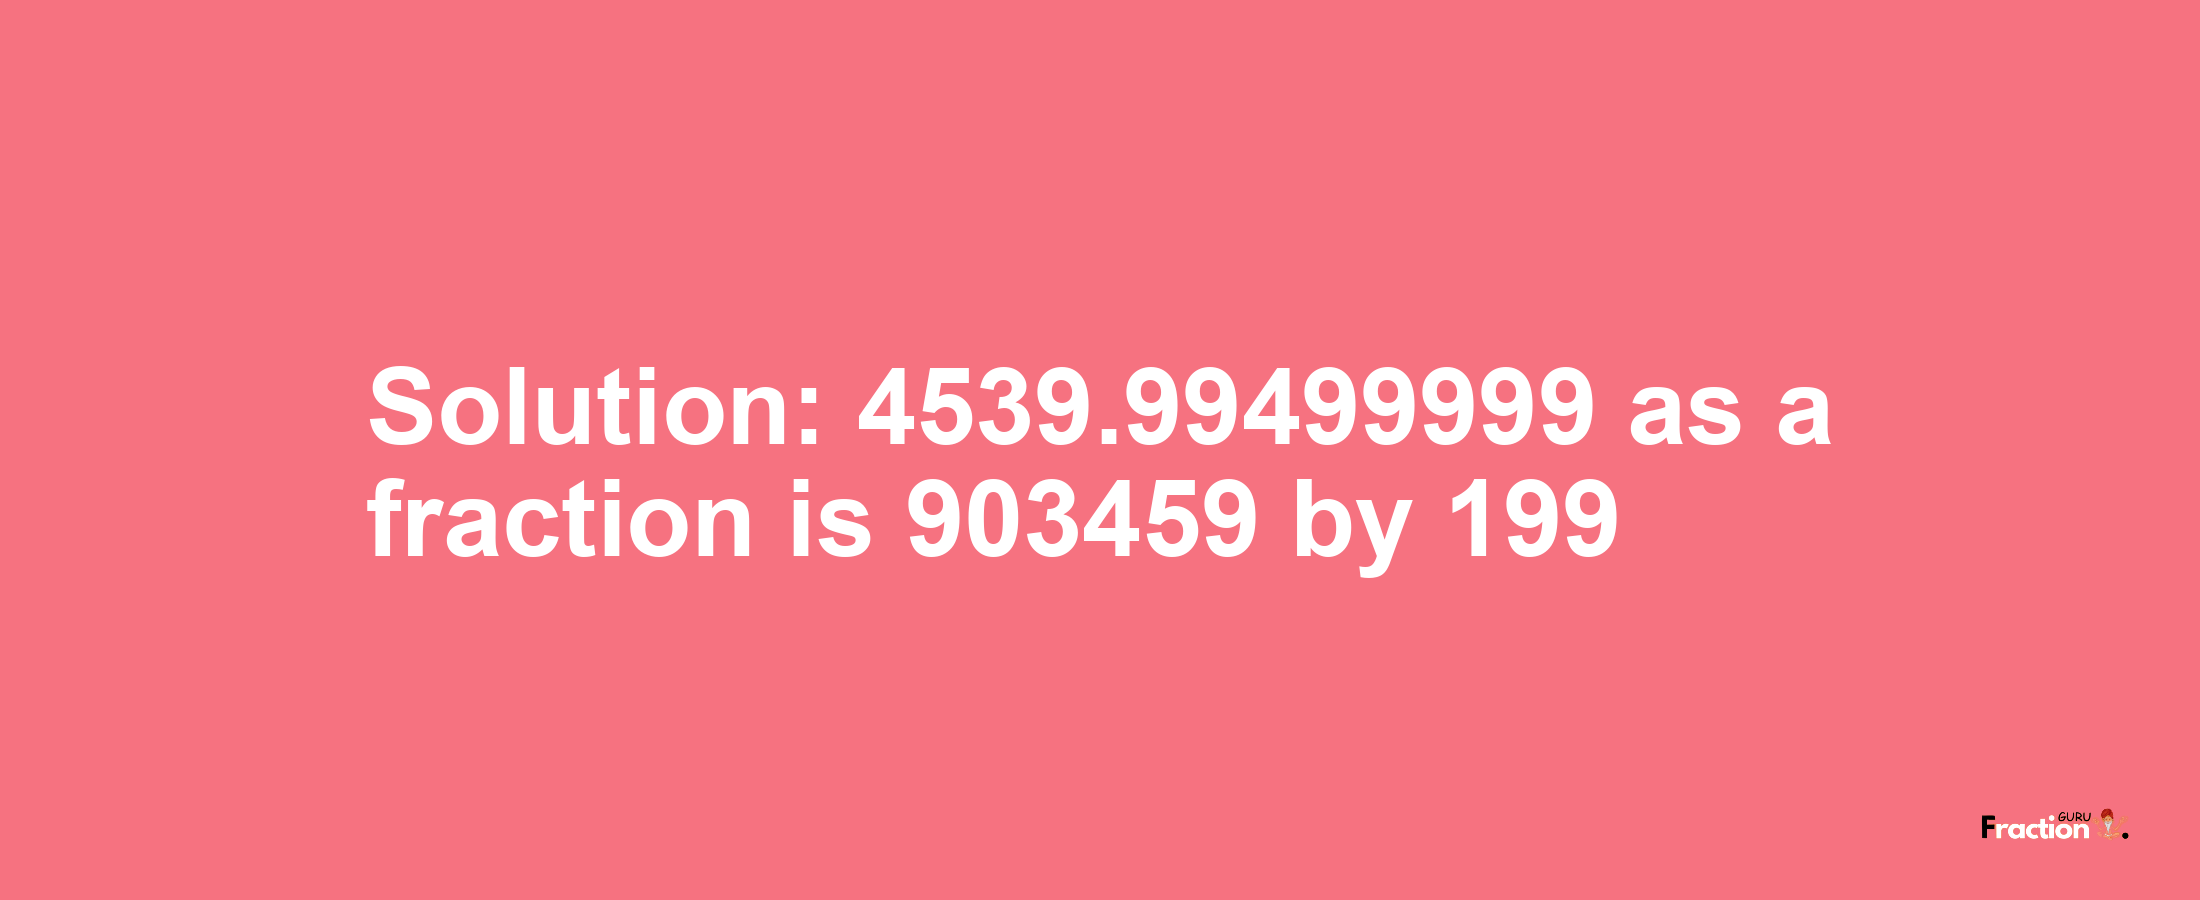 Solution:4539.99499999 as a fraction is 903459/199